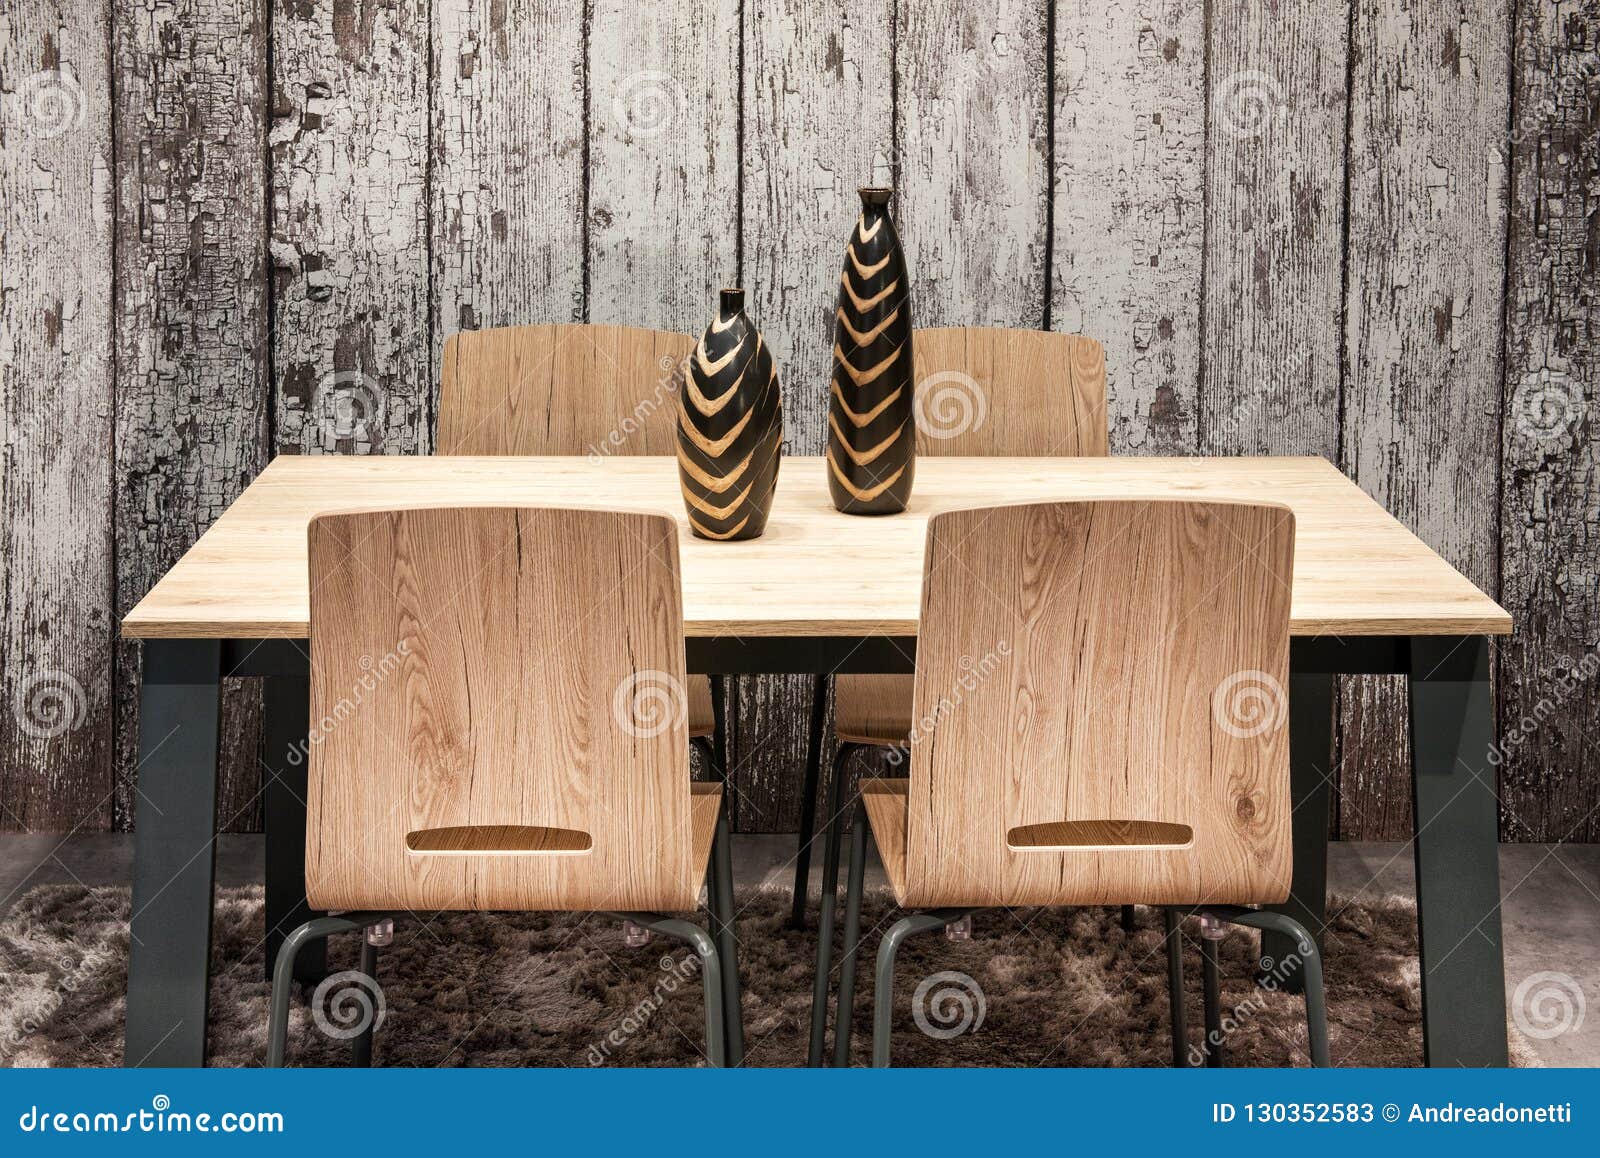 Modern Wooden Table And Chairs With Vases Stock Image Image Of